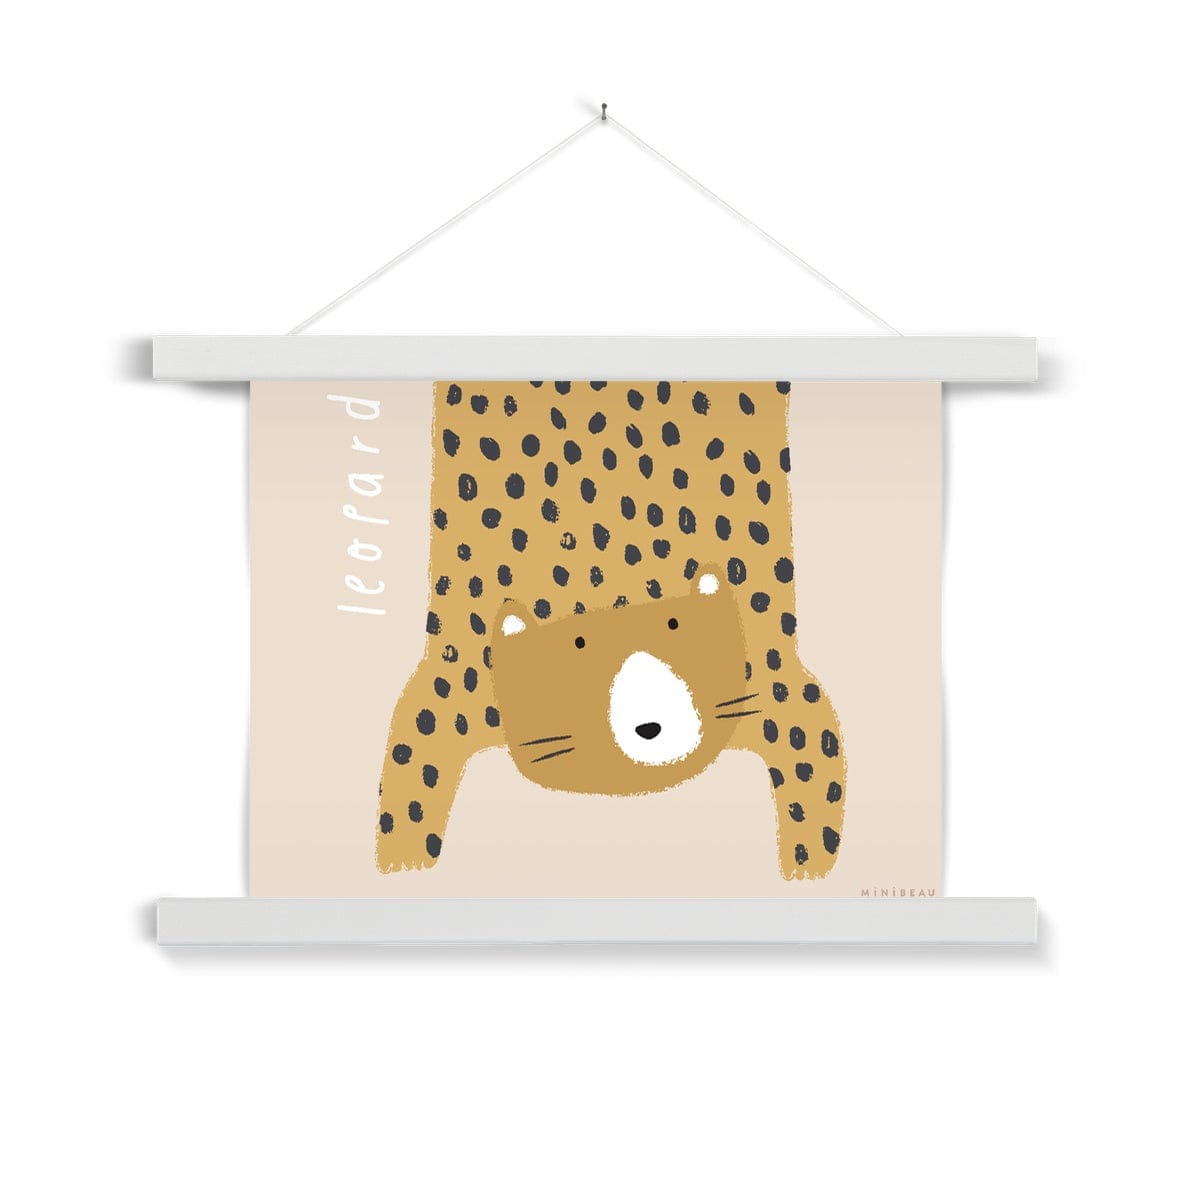 Our Leopard art print shows a hand-drawn leopard hanging down in to the picture, lifting it's head to look out at us on a beige background, with the word leopard written alongside it, in a white wooden hanger, hanging from a nail in a white wall